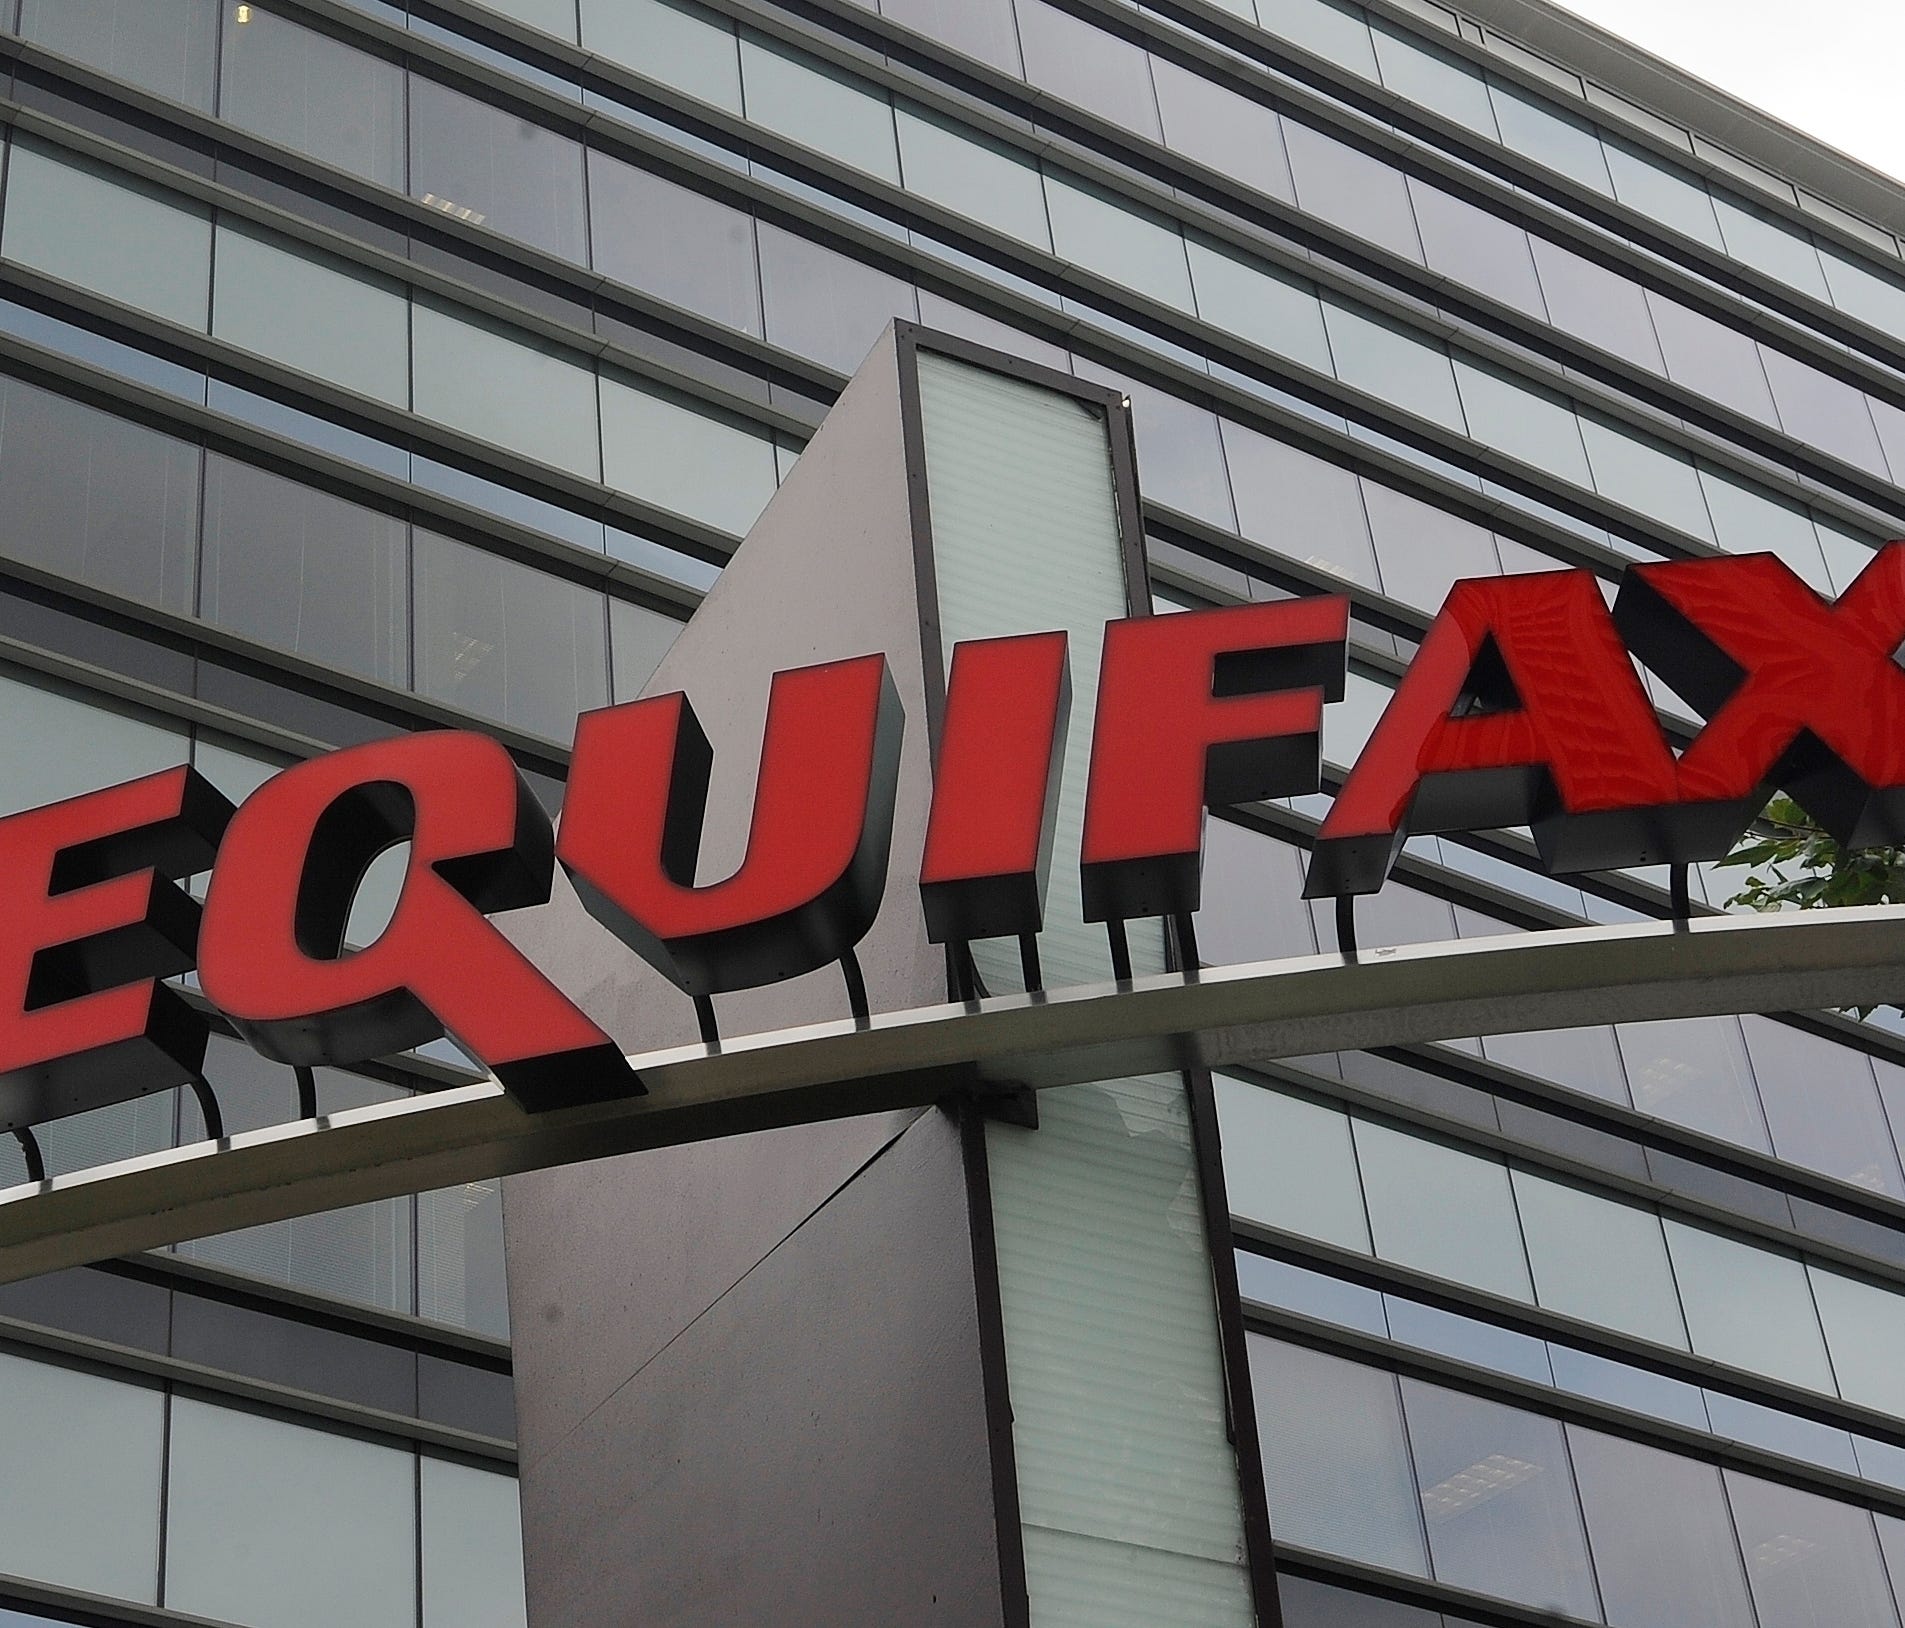 The signage at the corporate headquarters of Equifax Inc. in Atlanta. Credit report company Equifax said Monday, Oct. 2, 2017, that an additional 2.5 million Americans may have been affected by the massive security breach of its systems, bringing the